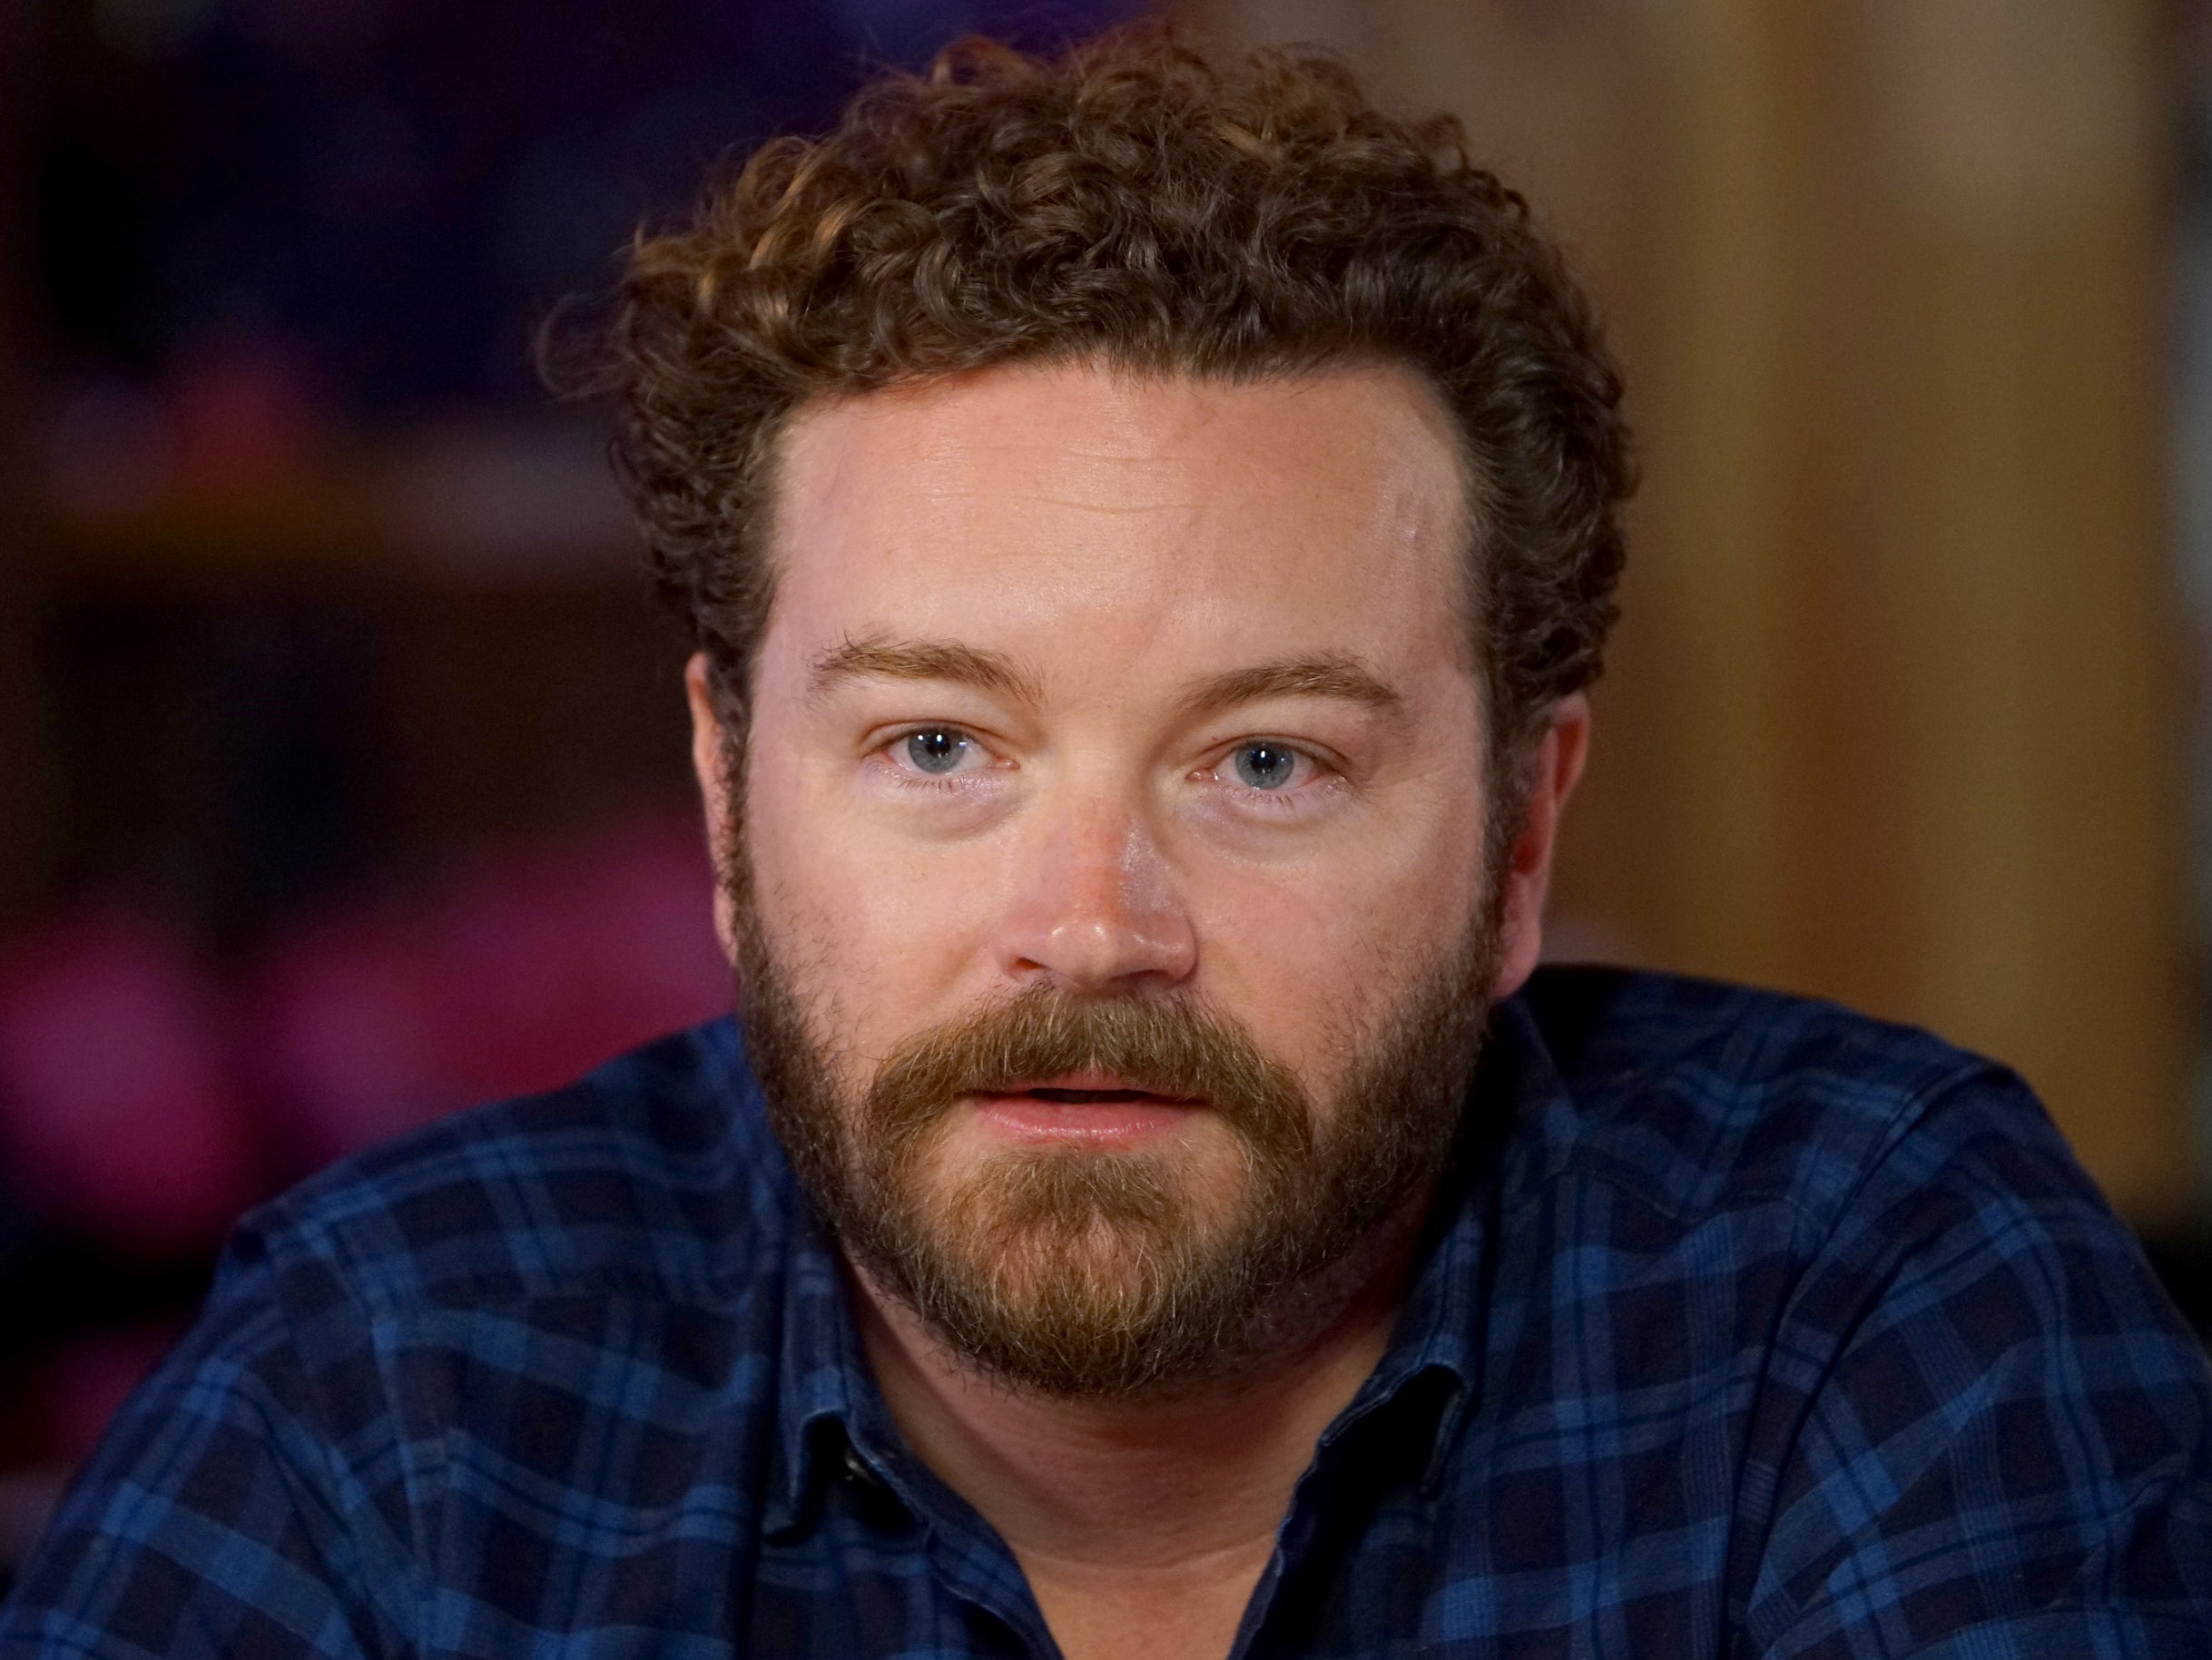 Danny Masterson was sentenced to 30 years to life in prison for the rapes of two women two decades ago